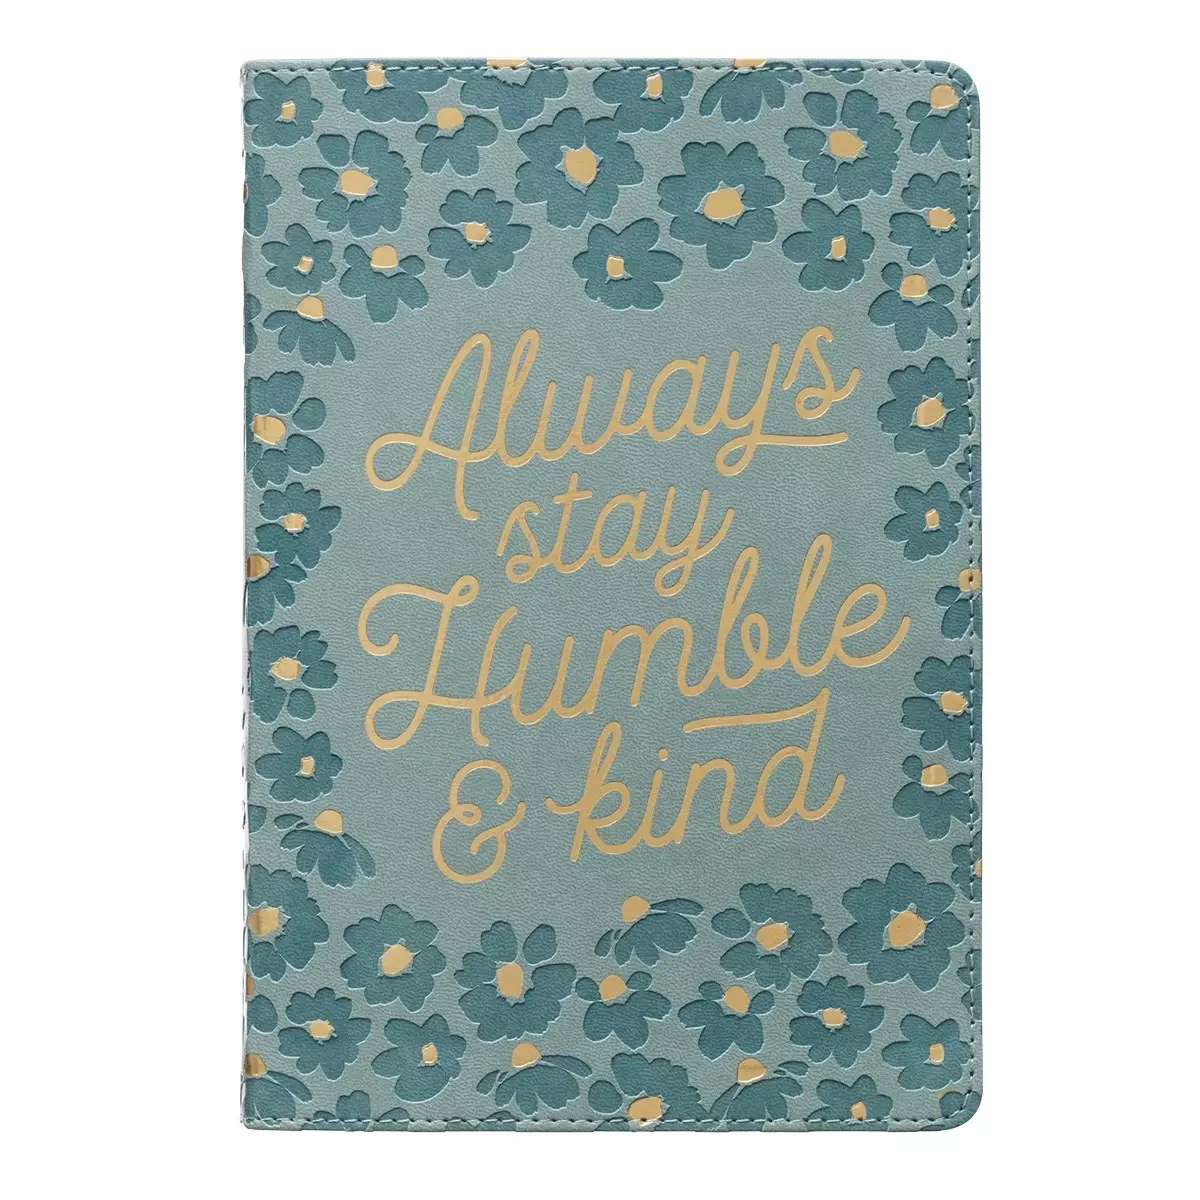 Stay Humble And Kind Classic Journal